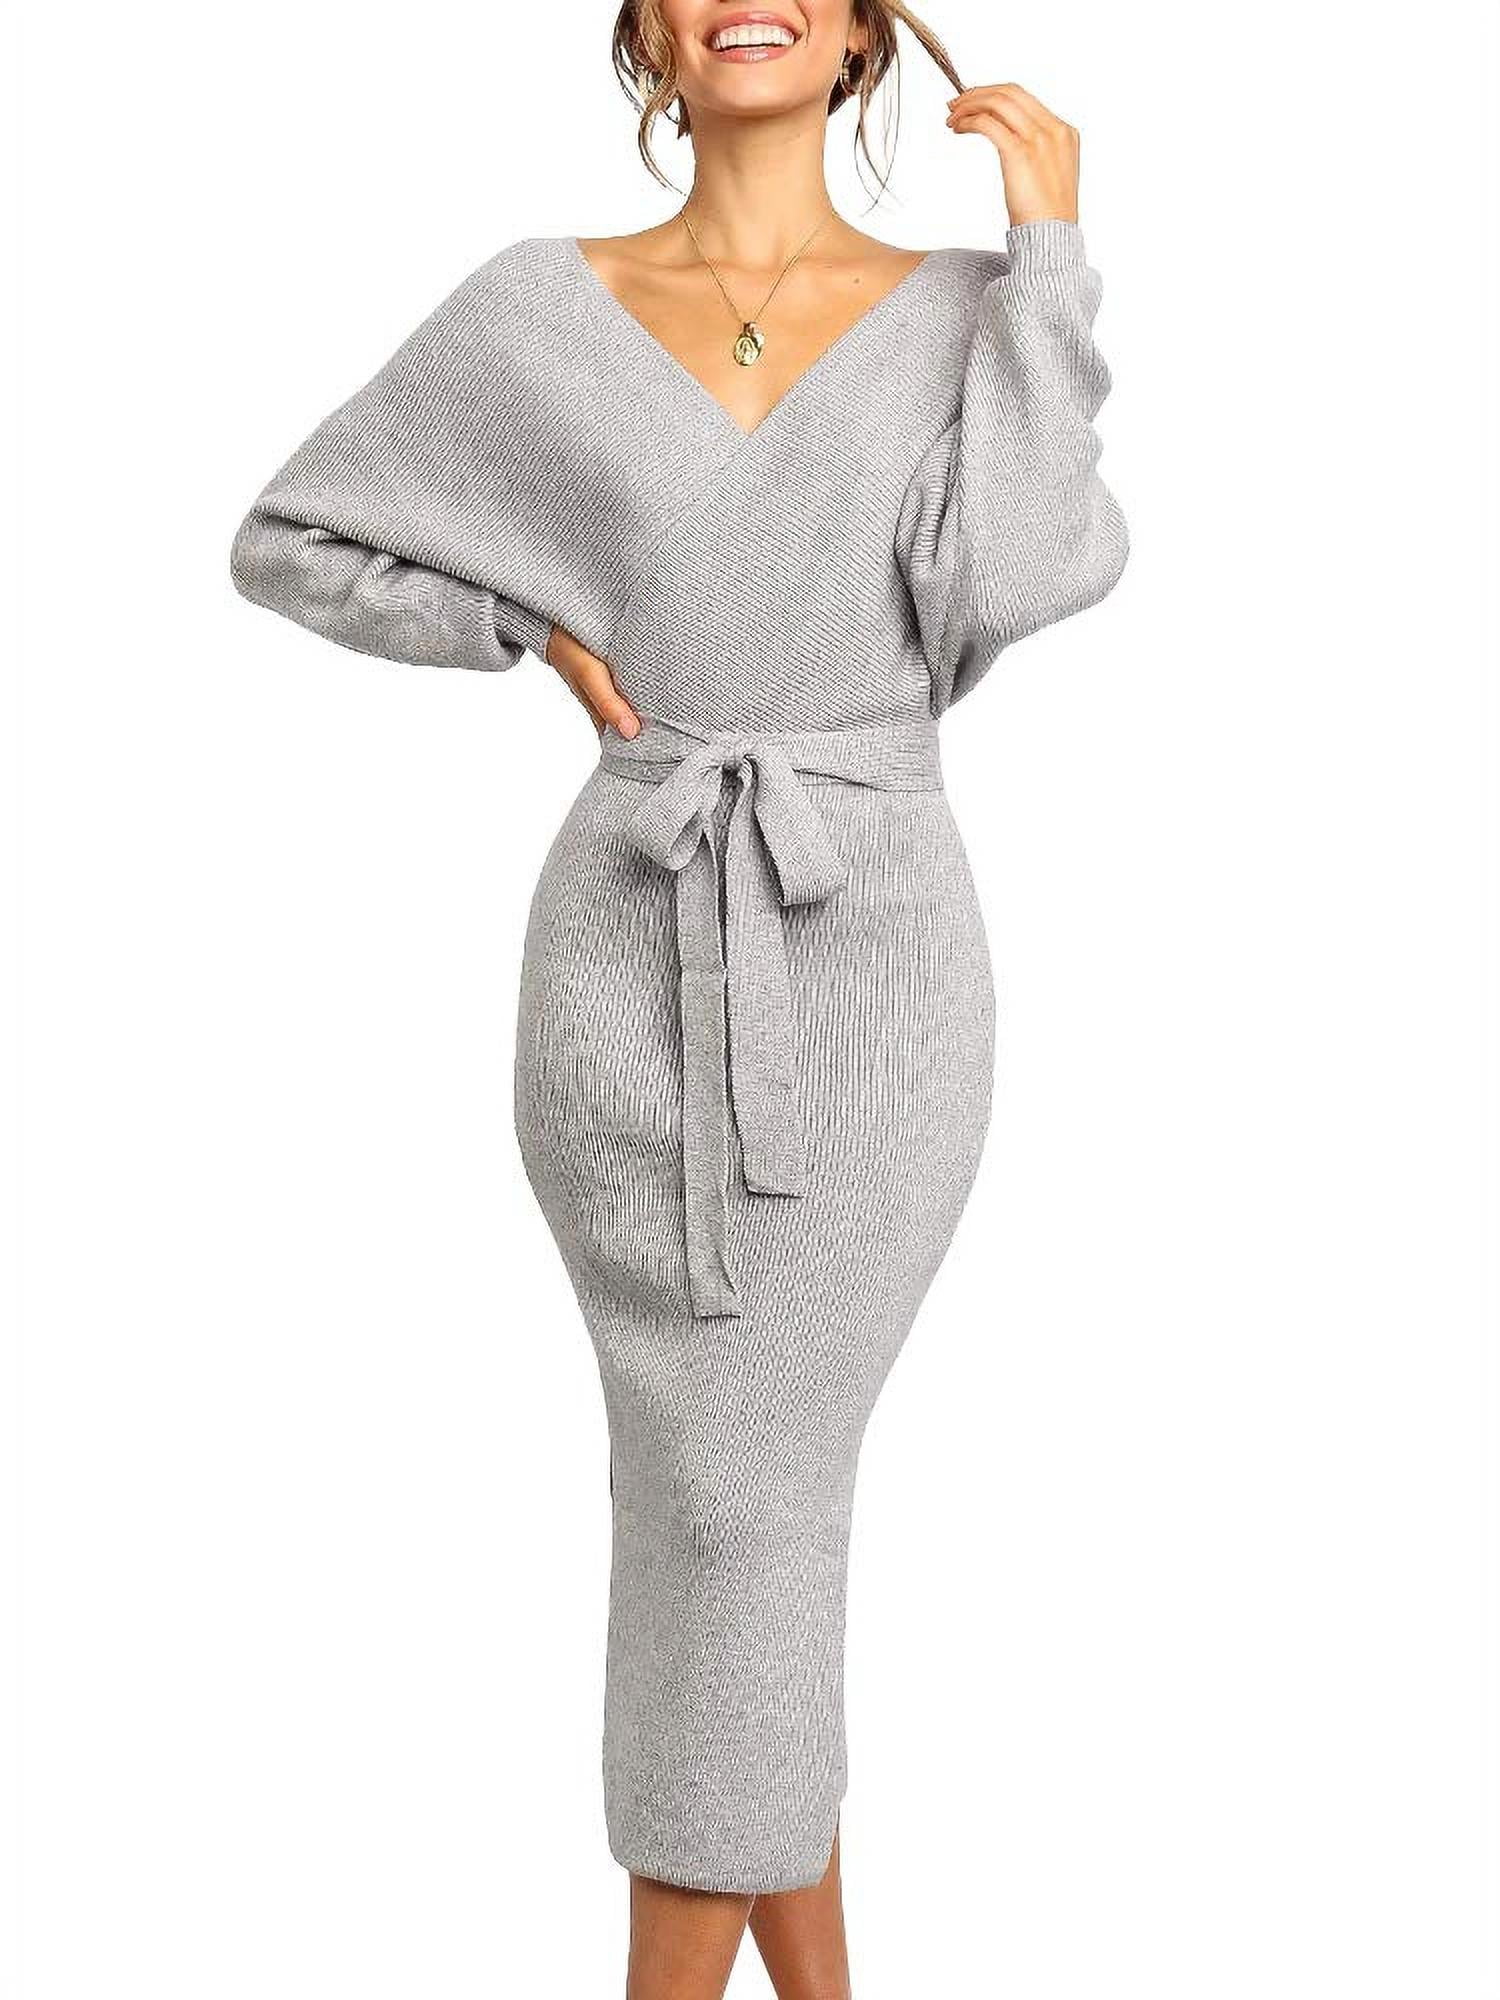 Women Long Maxi Sweater Dresses Sexy Wrap Batwing V Neck Slit Open Back Holiday Bodycon Dress